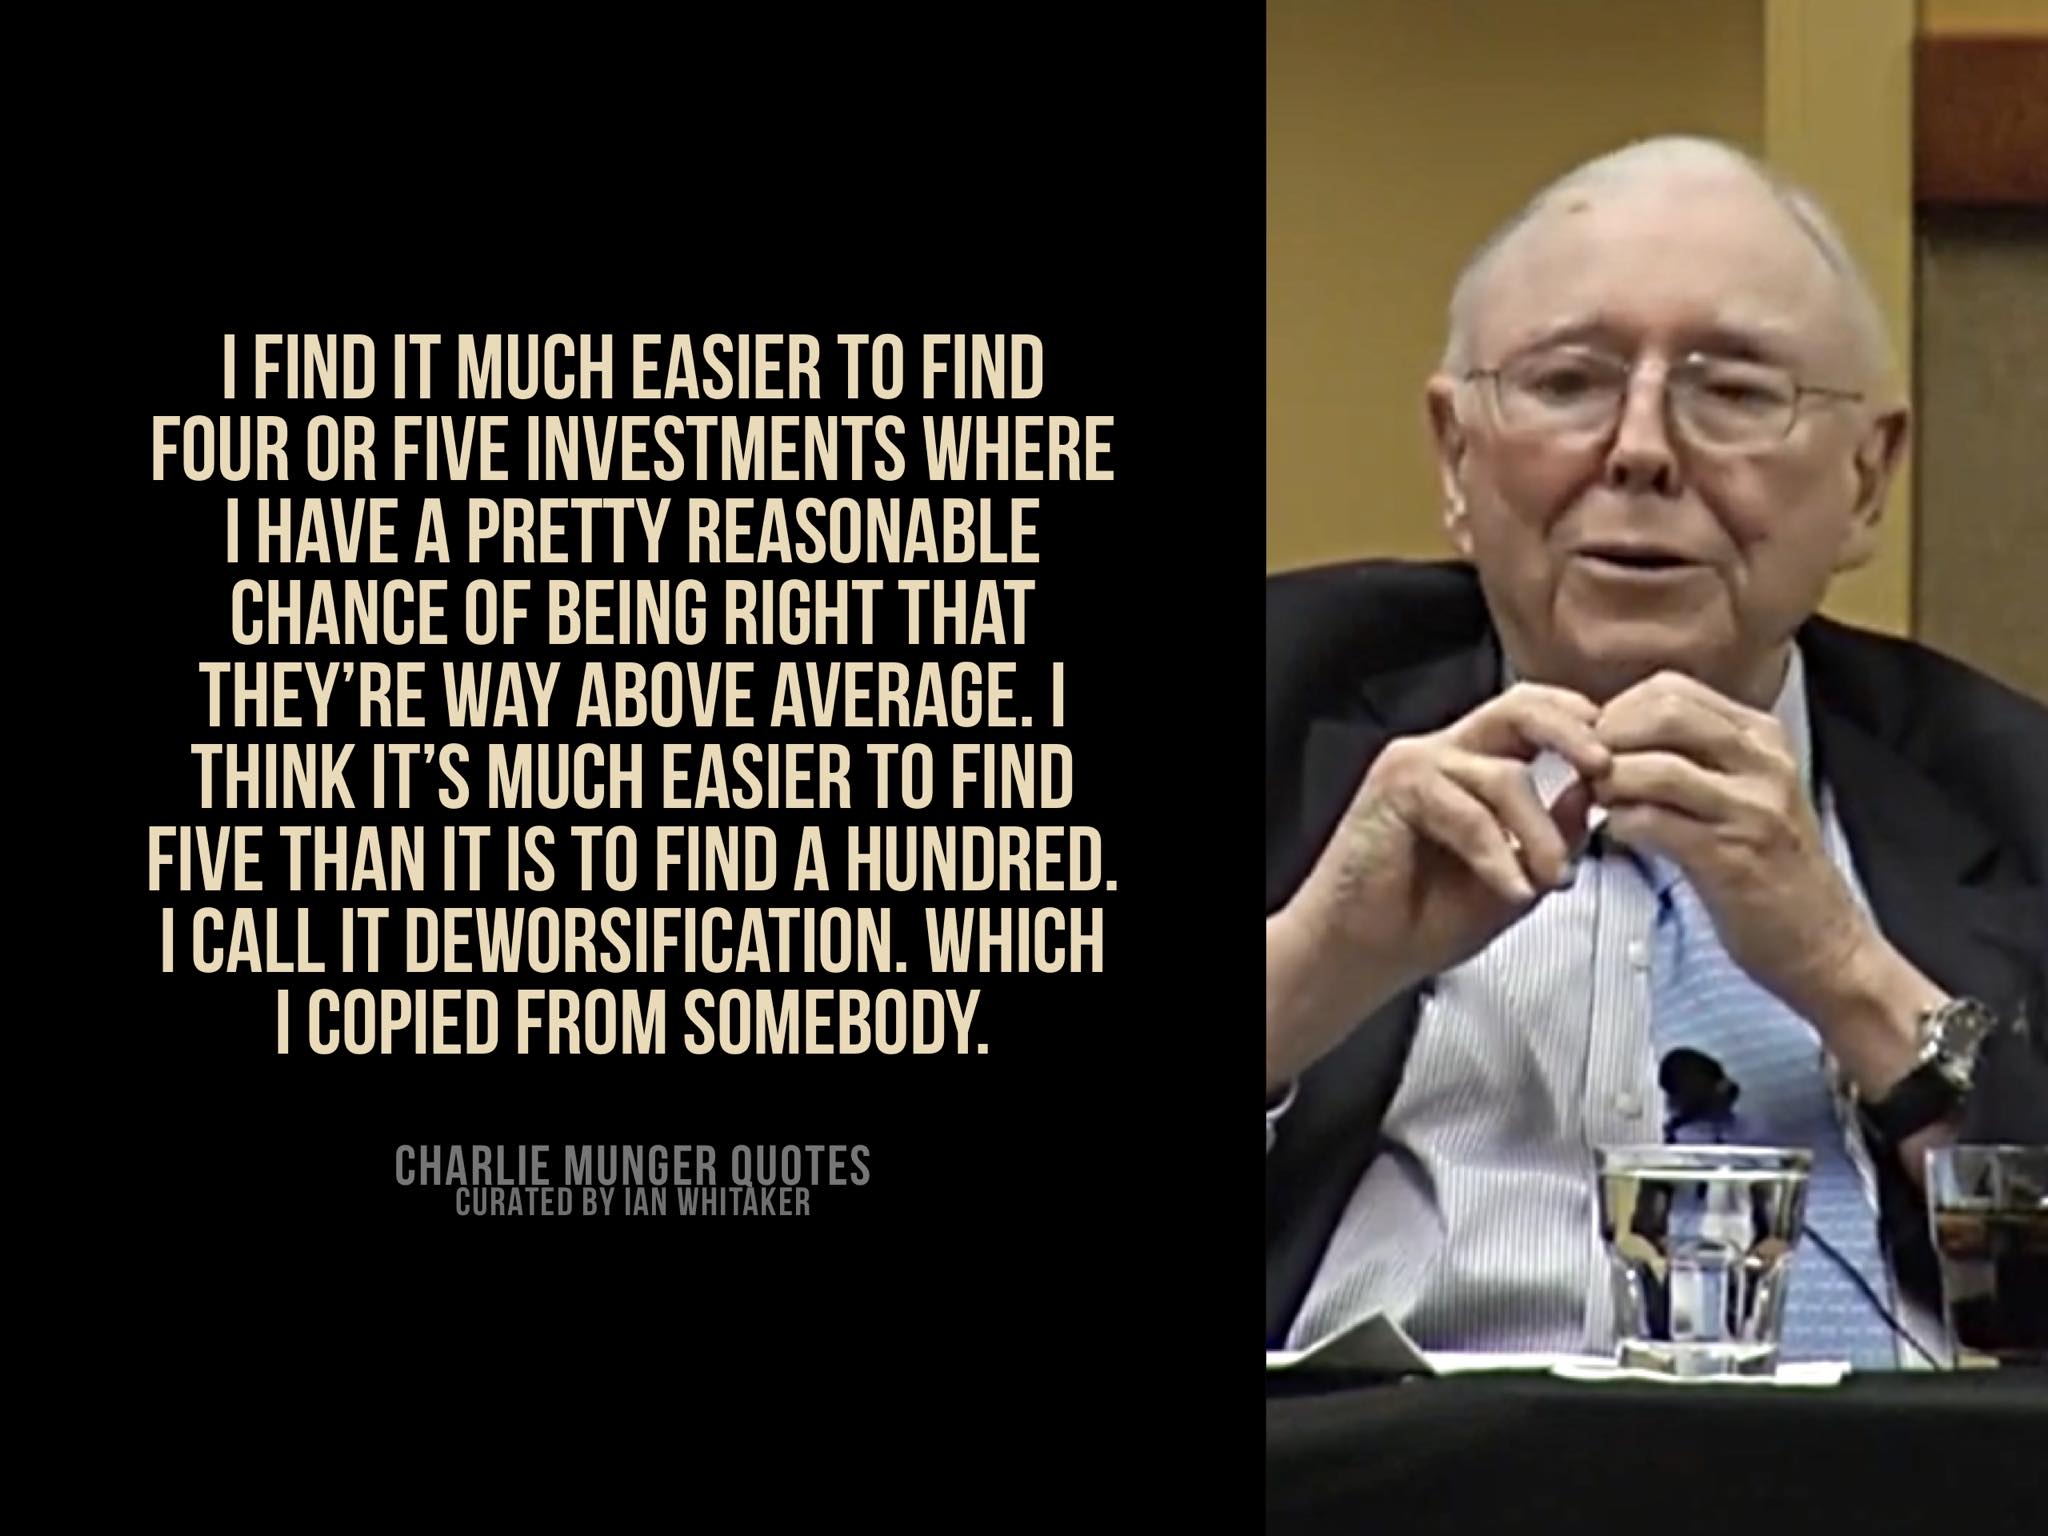 Charlie Munger Quotes Curated By Ian Whitaker Photos